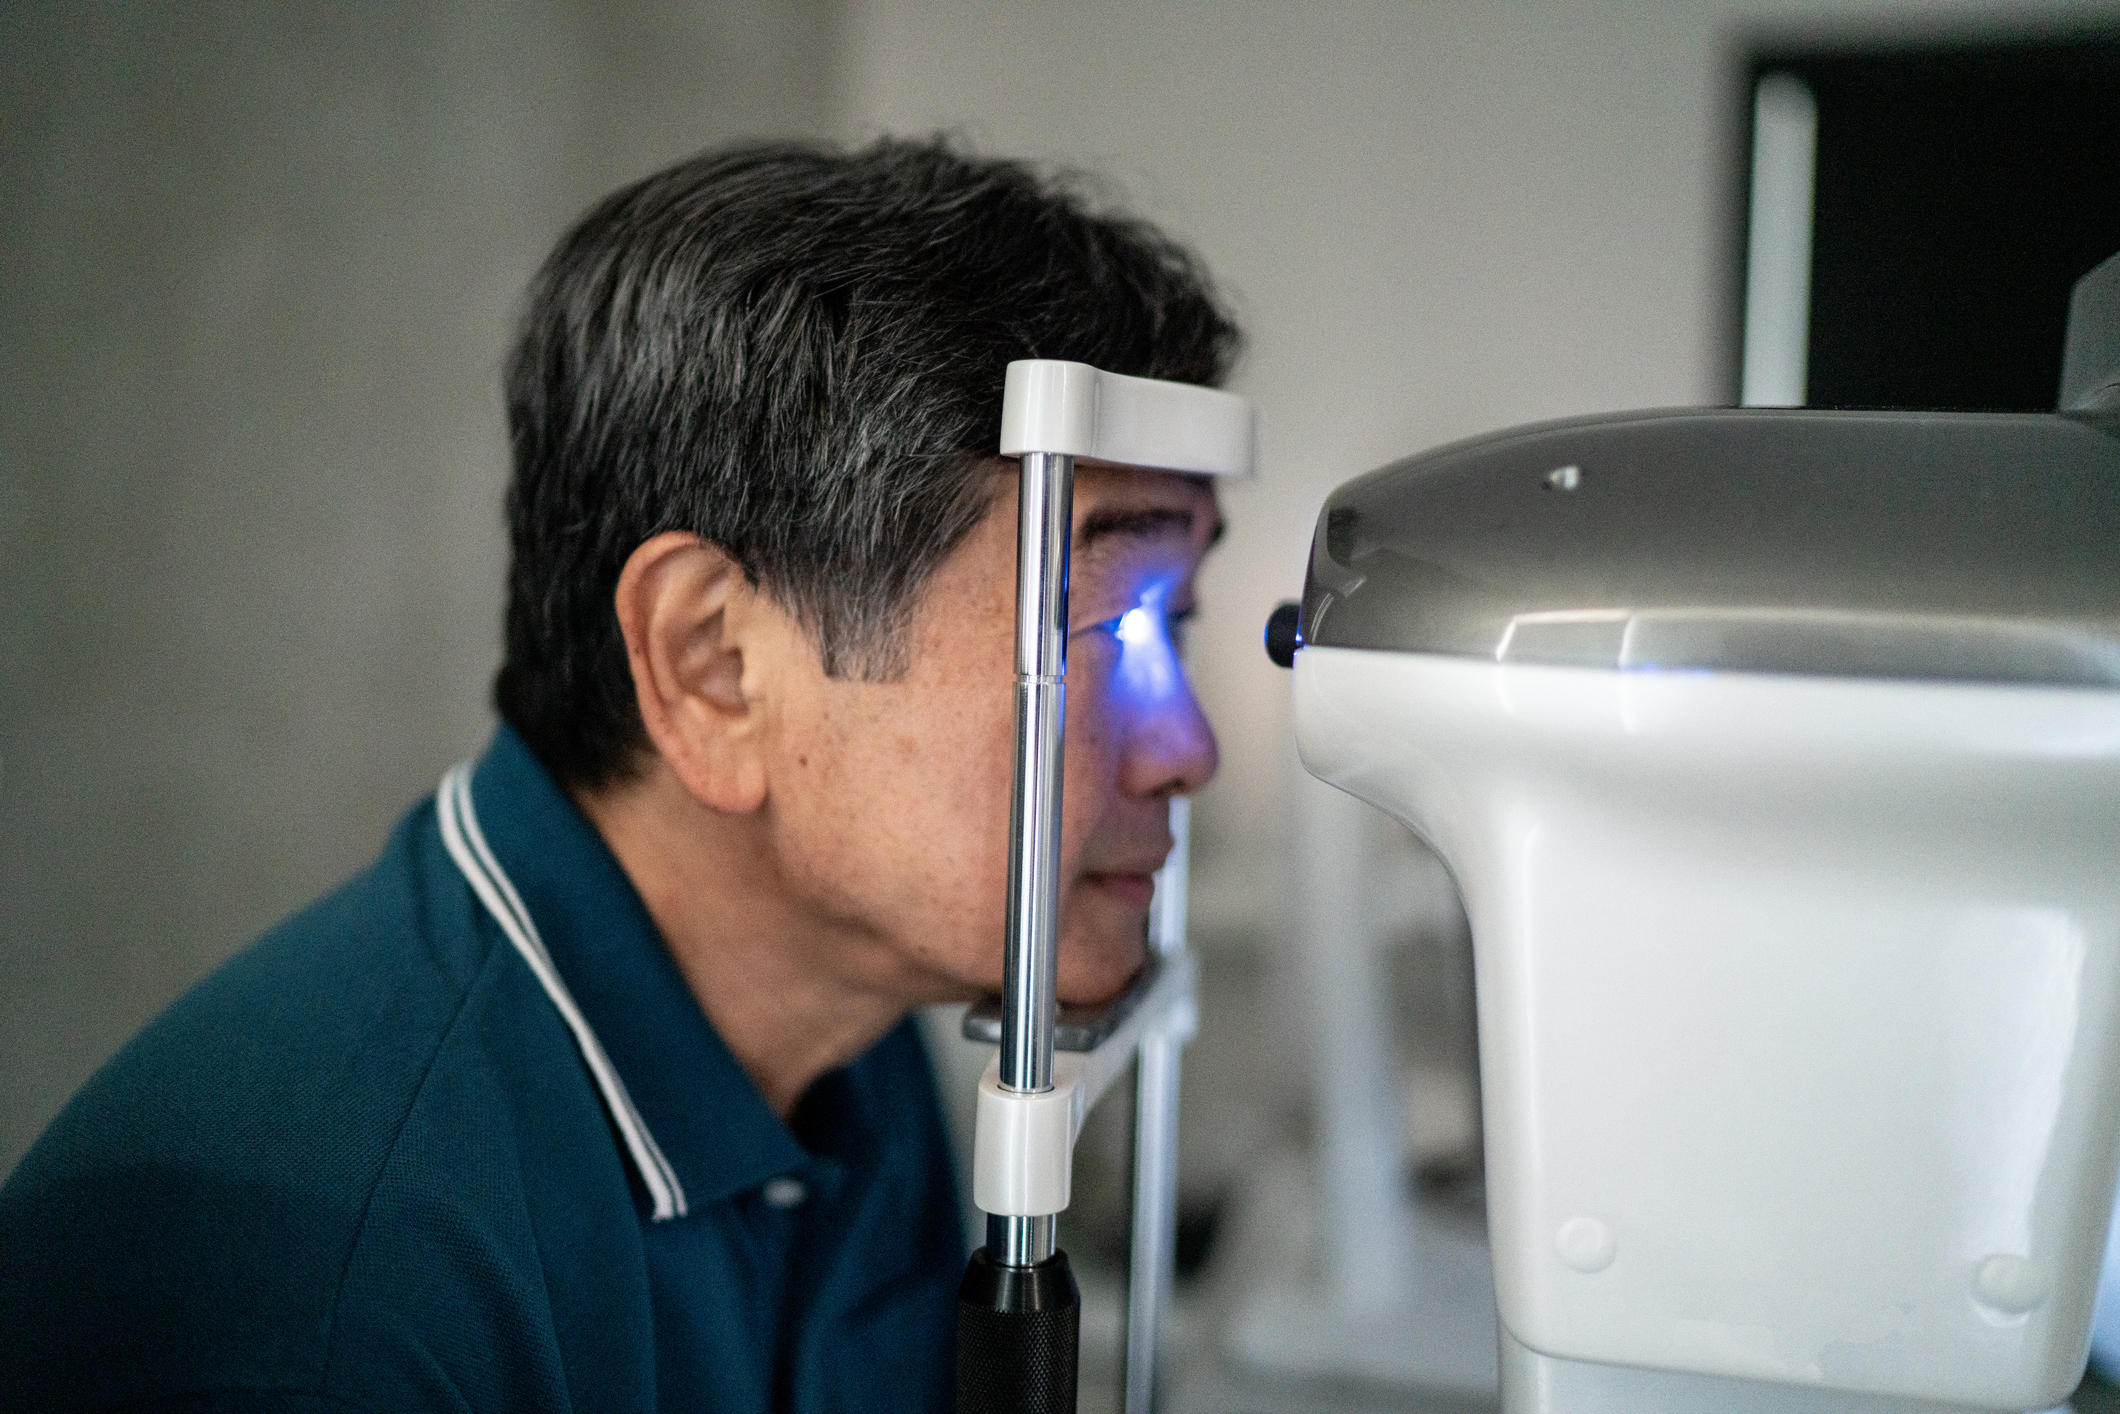 A middle aged Asian man in a blue collared shirt leans forward to take an eye test from a machine that shines bright blue light into his eyes